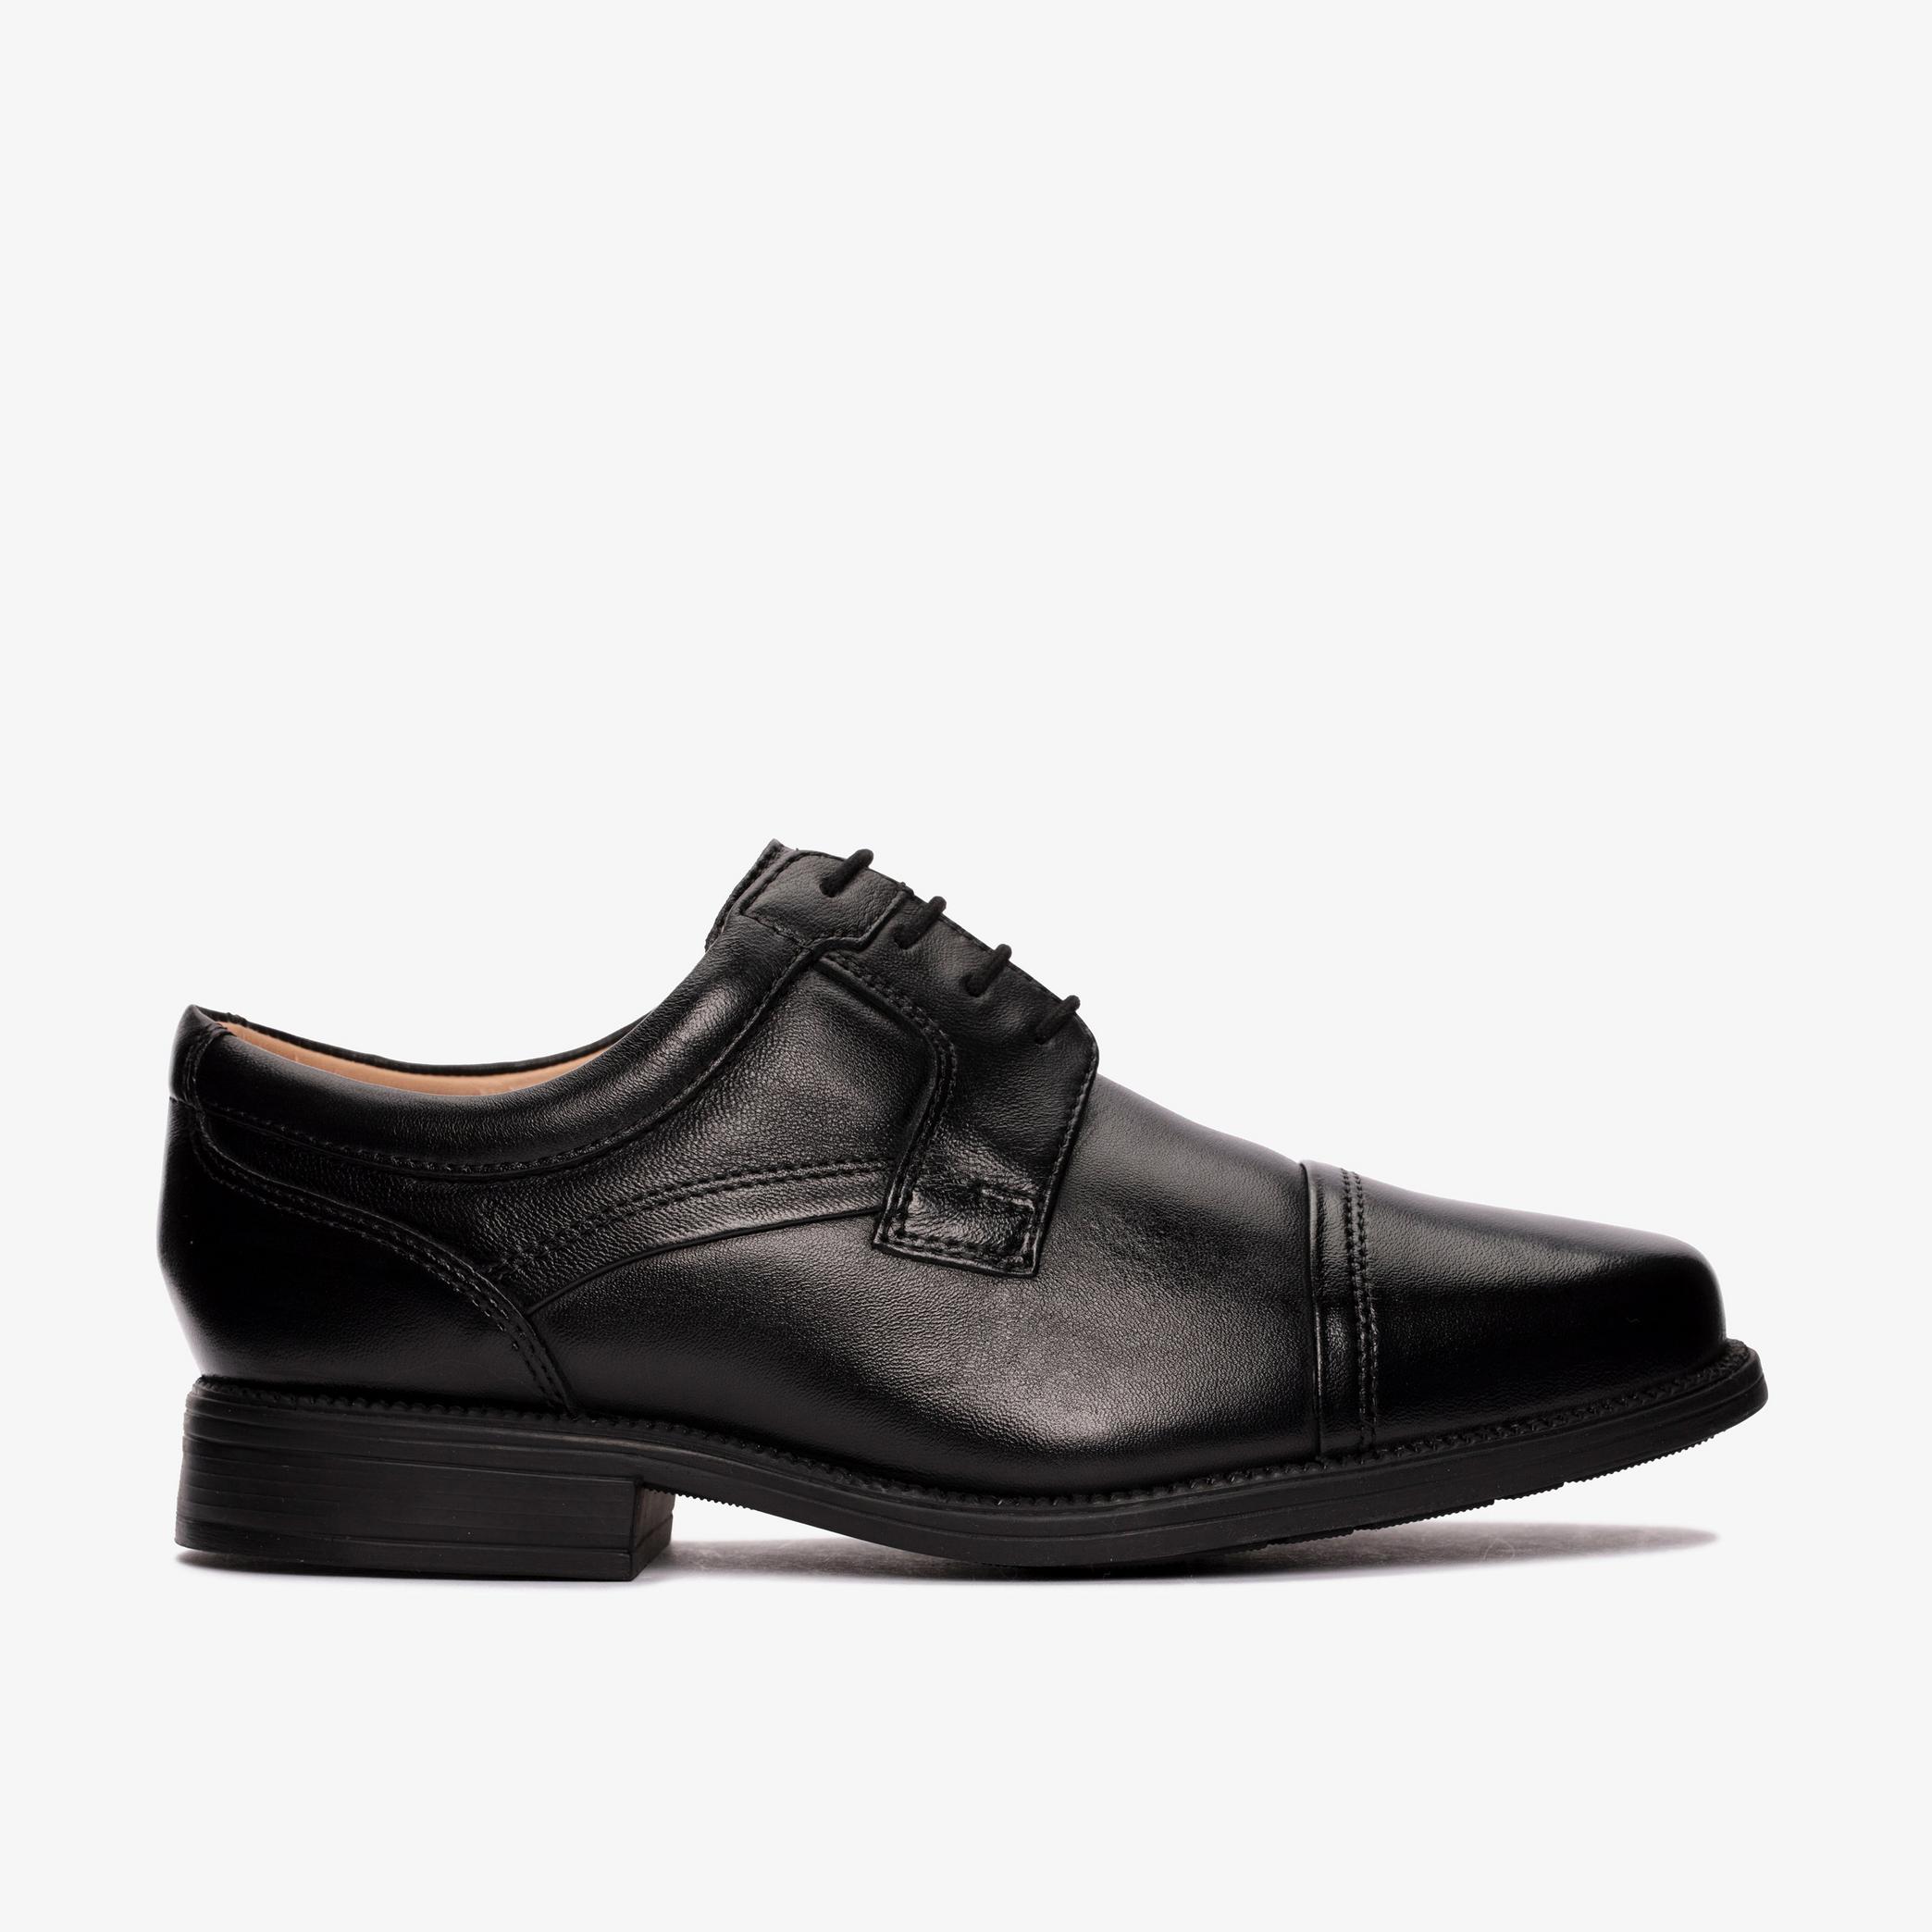 Hail Cap Black Leather Shoes, view 1 of 6